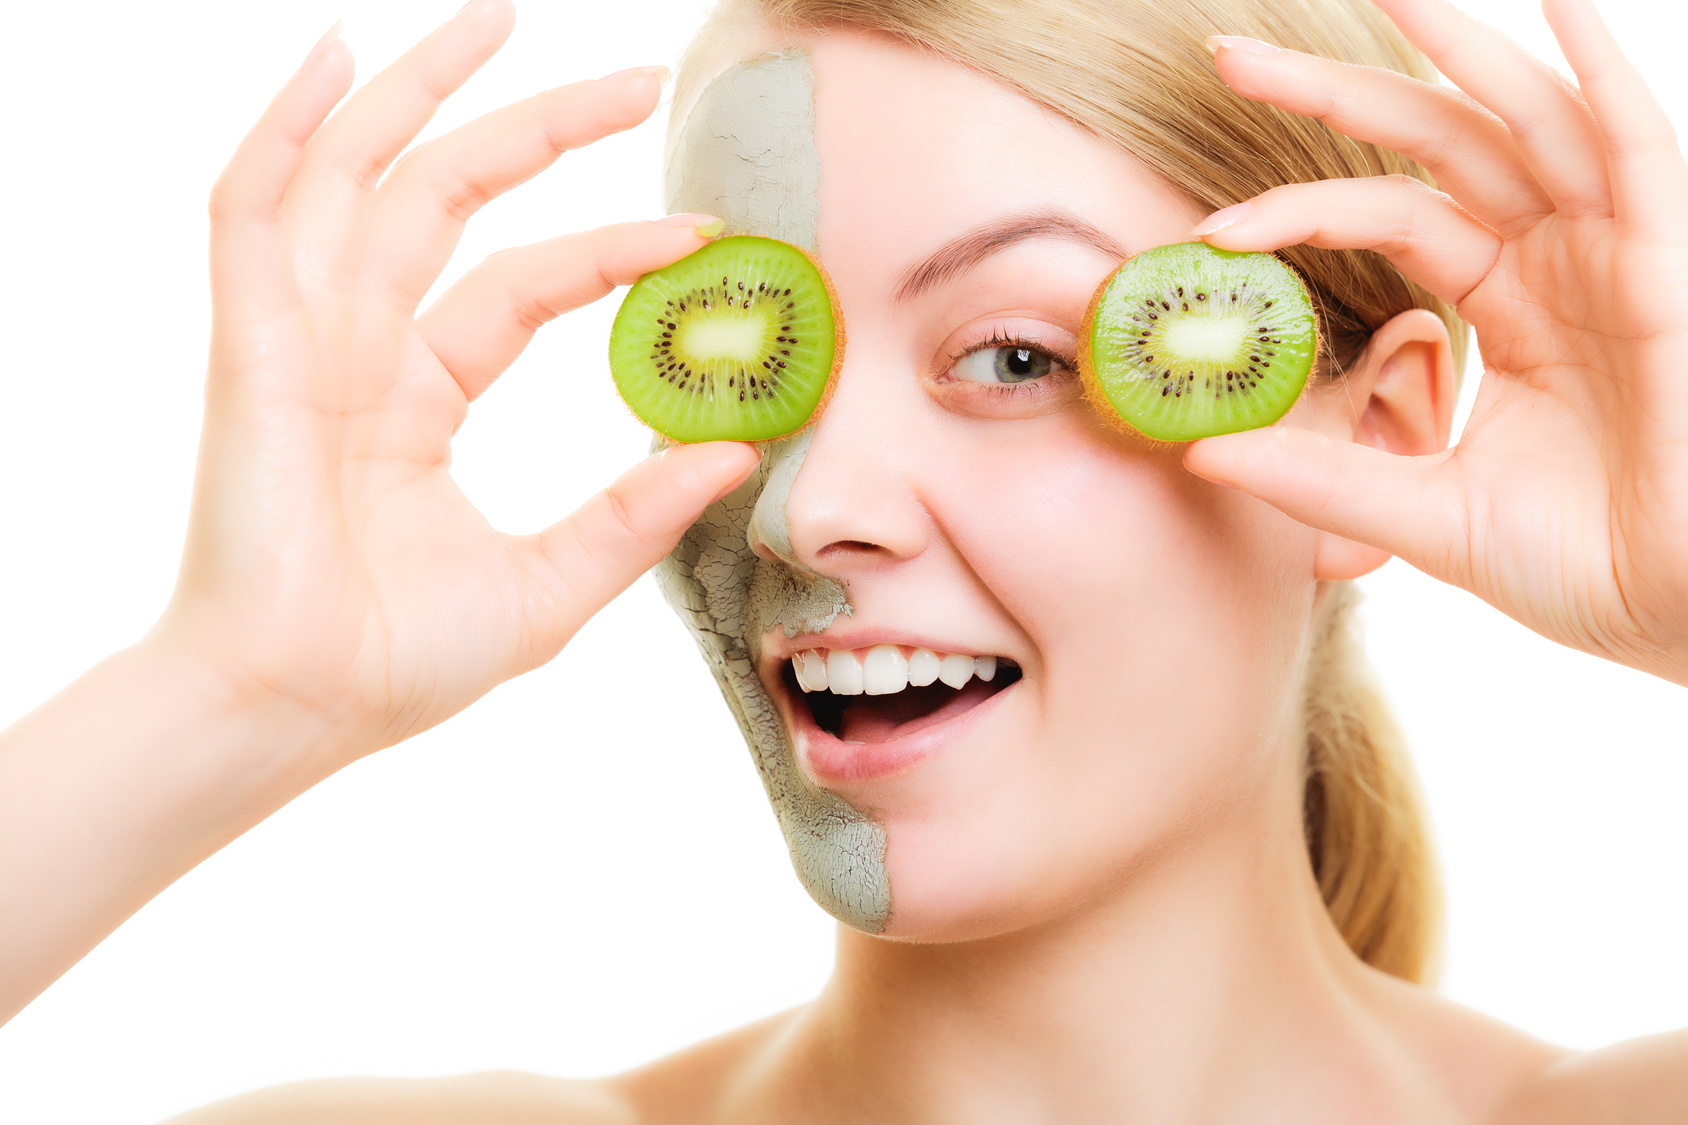 Skin care. Woman in clay mud mask on face holding slices of kiwi fruit isolated. Girl taking care of dry complexion.